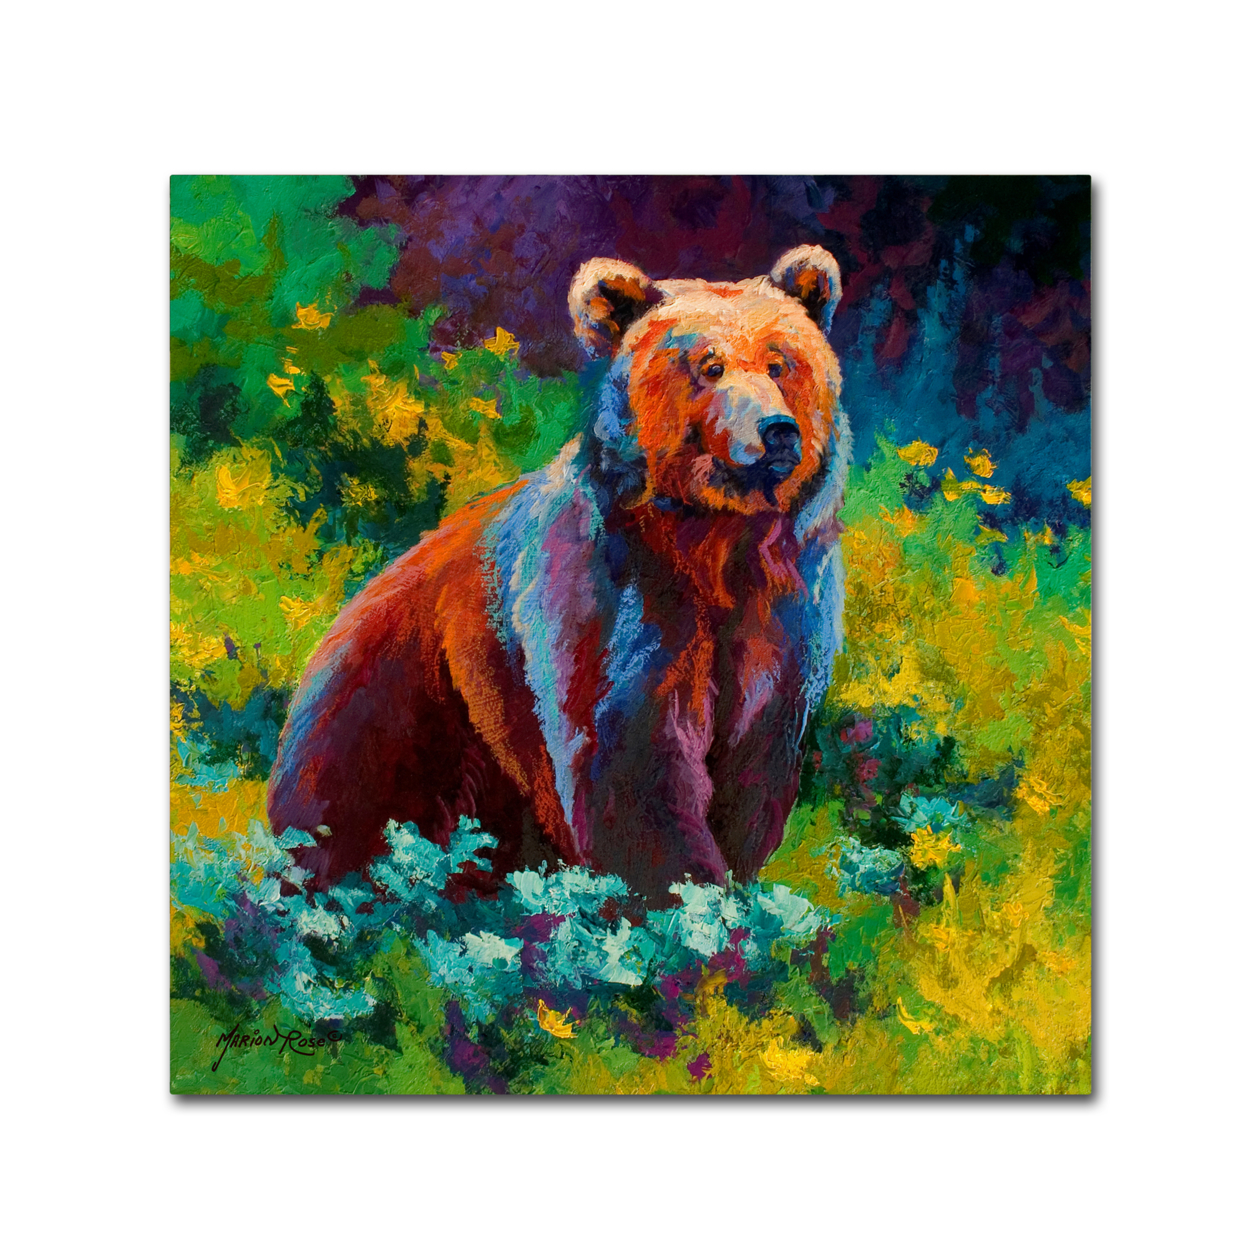 Marion Rose 'Wildflower Grizz' Ready To Hang Canvas Art 18 X 18 Inches Made In USA